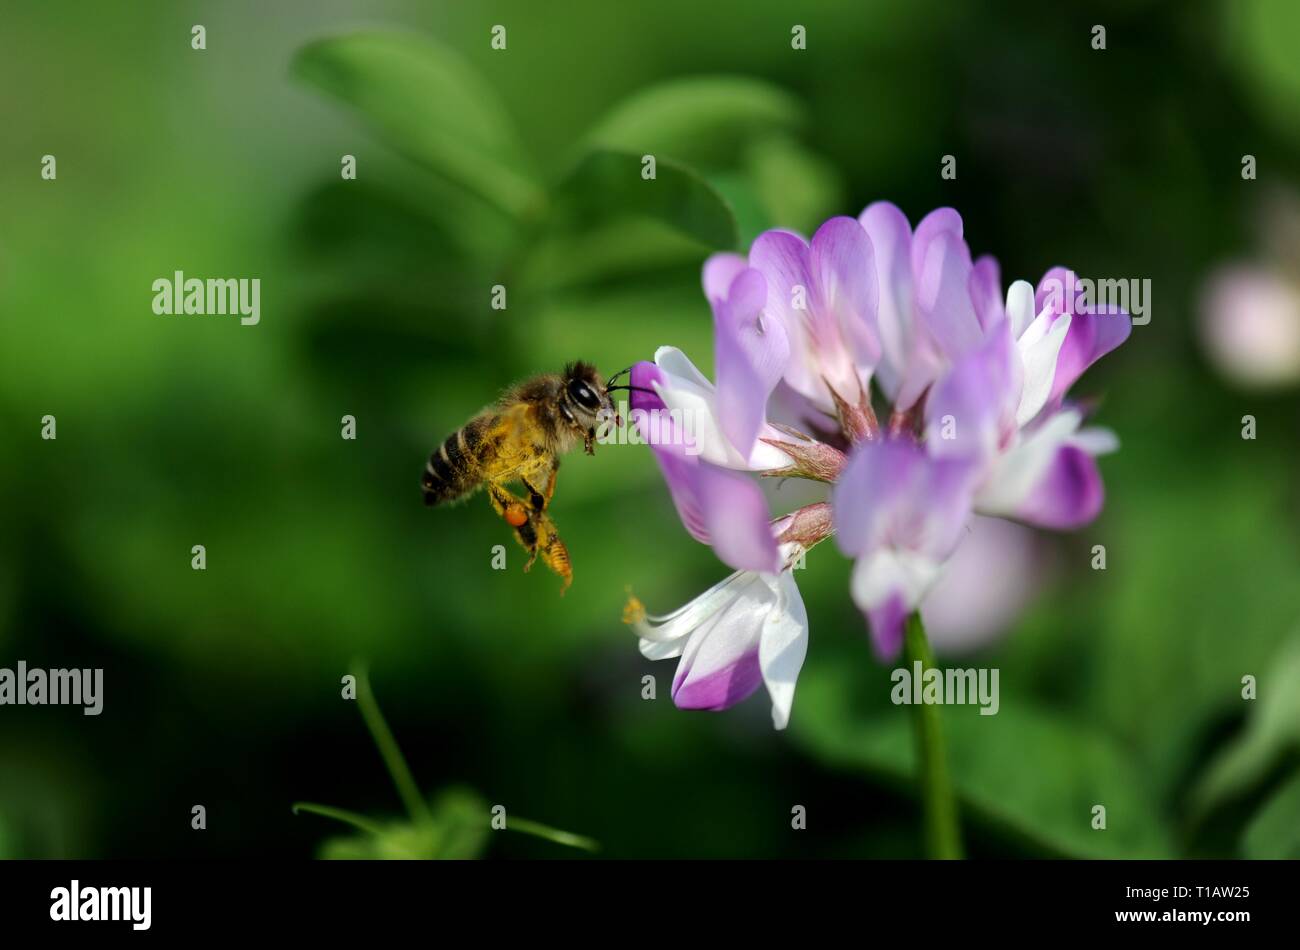 Shanghai, China. 23rd Mar, 2019. A milkvetch blossom is seen in Dongjing Township, Songjiang District of Shanghai, east China, March 23, 2019. Credit: Zhang Jiansong/Xinhua/Alamy Live News Stock Photo